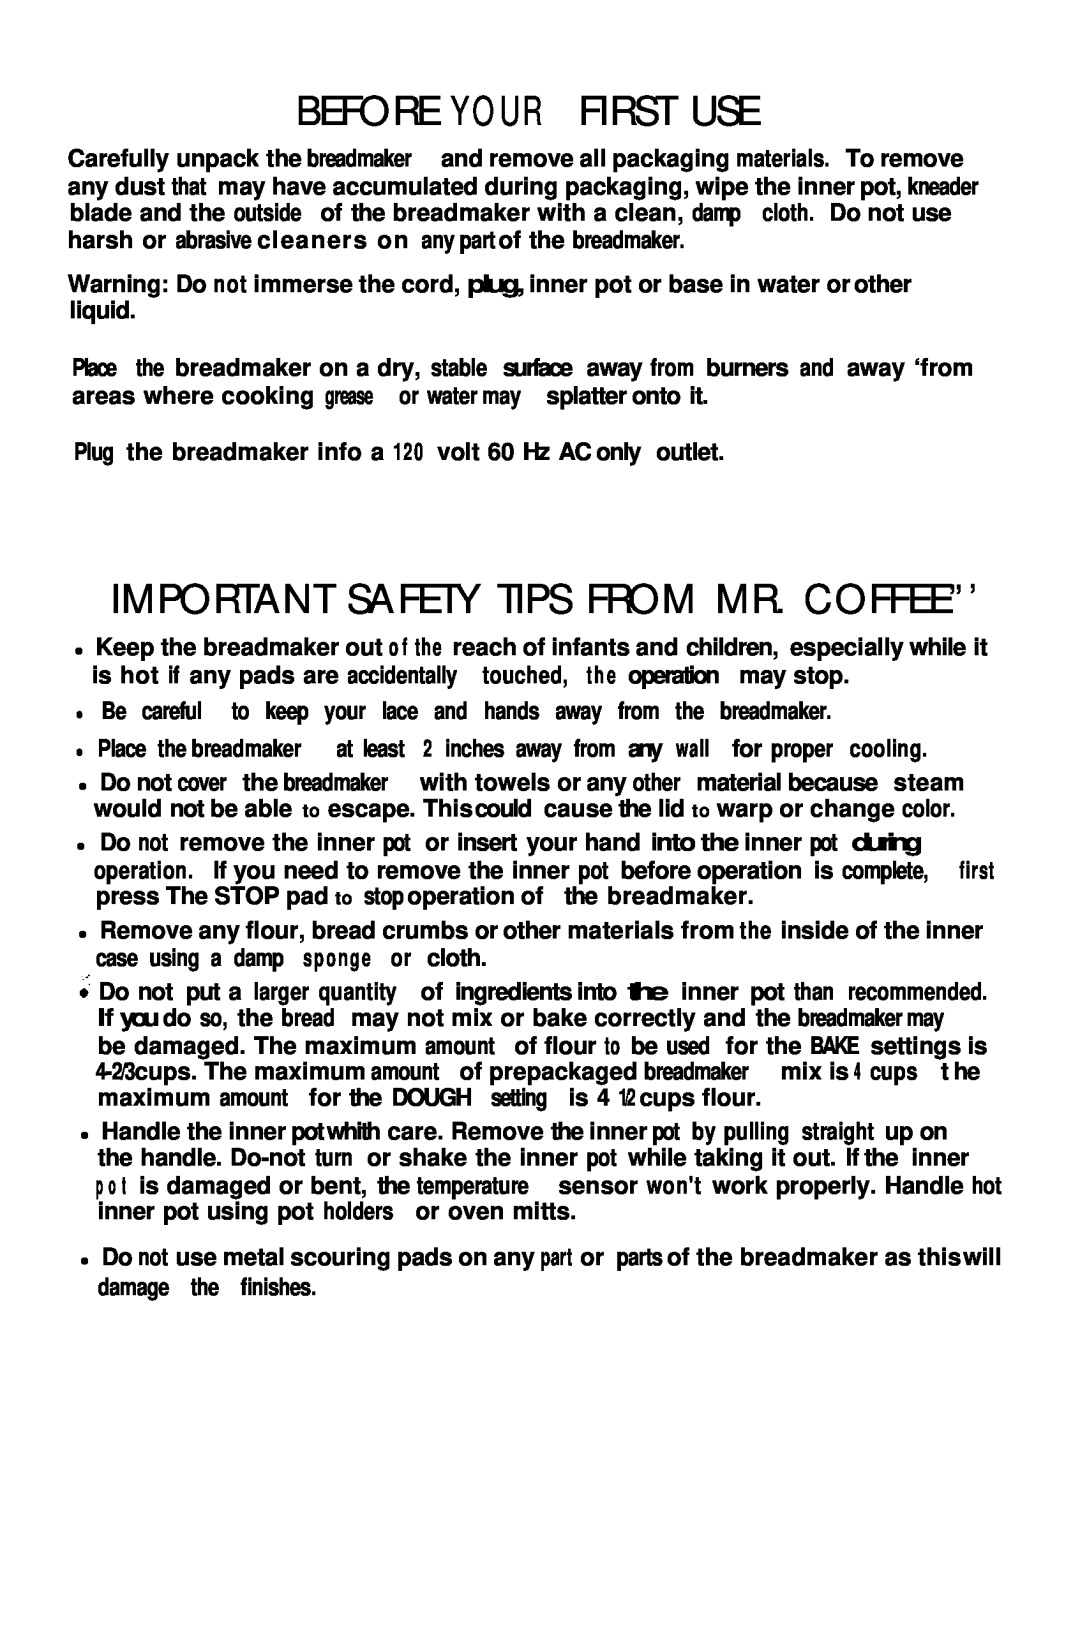 Mr. Coffee BMR 200 instruction manual Before Your First Use, Important Safety Tips From Mr. Coffee”’ 